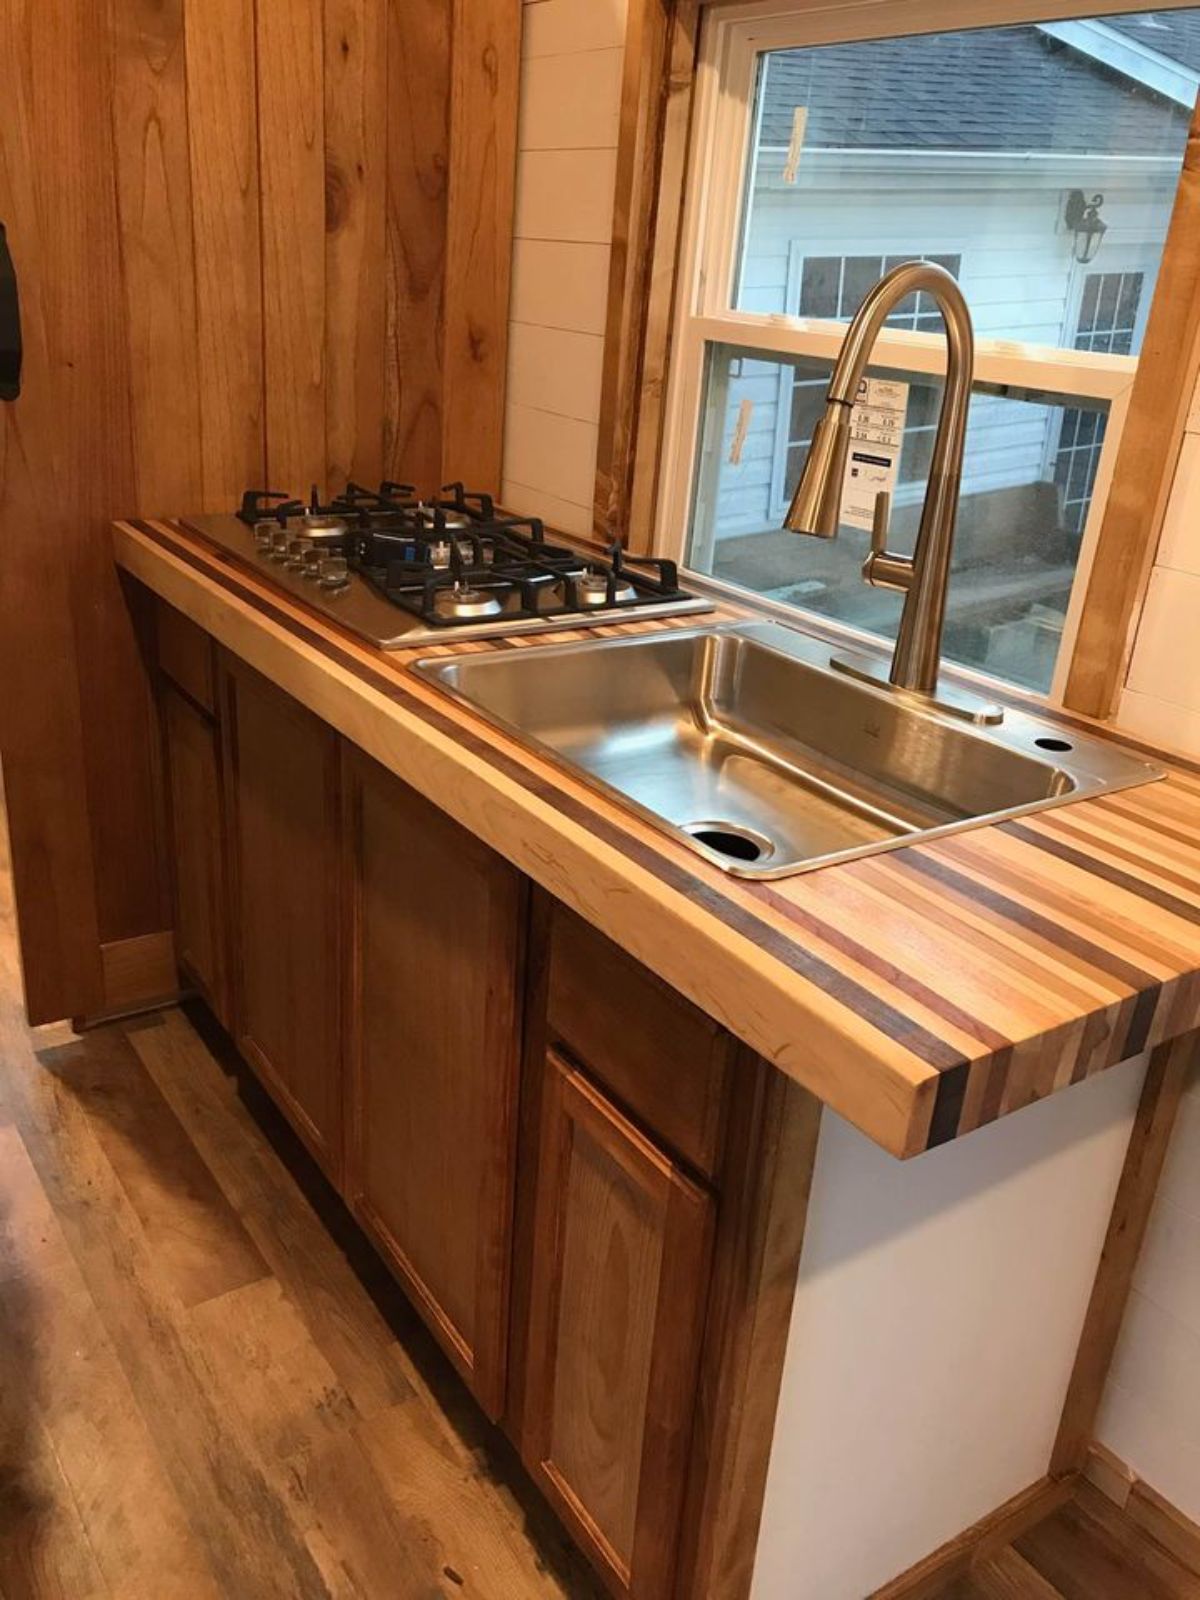 multi-colored butcher block style counters with sink and stove and wood cabinets below